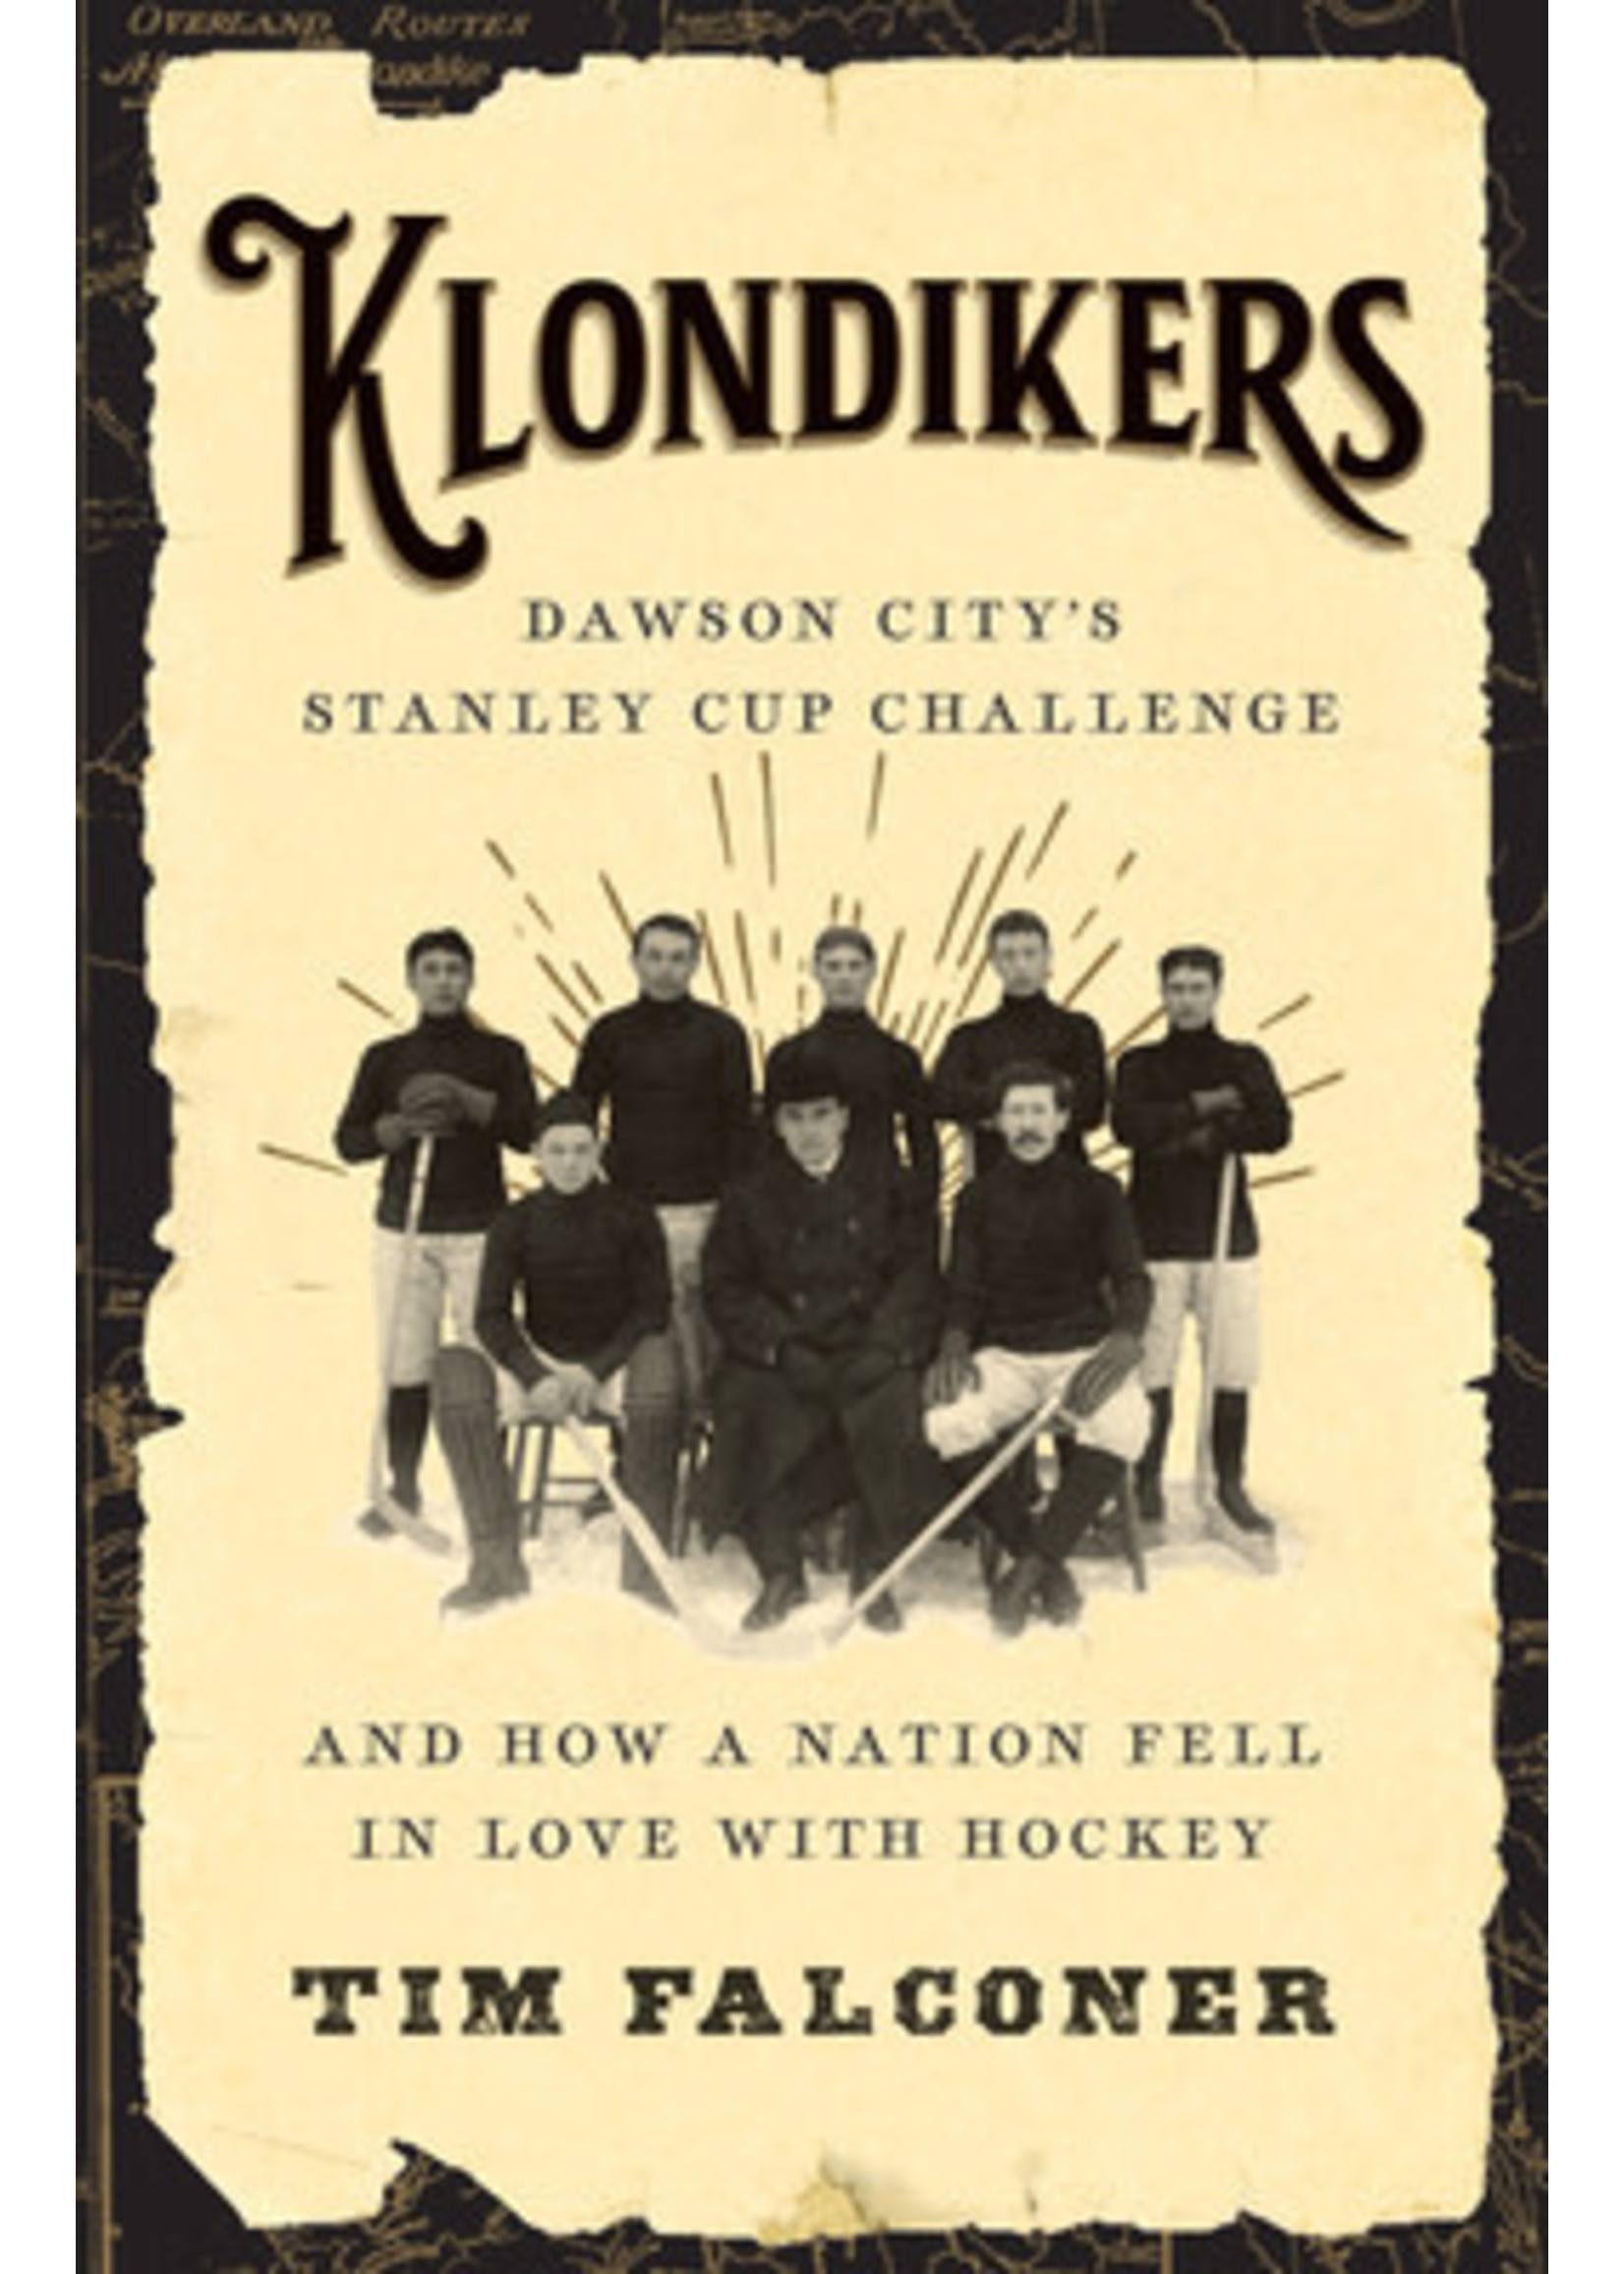 Klondikers: Dawson City's Stanley Cup Challenge and How a Nation Fell in Love with Hockey by Tim Falconer